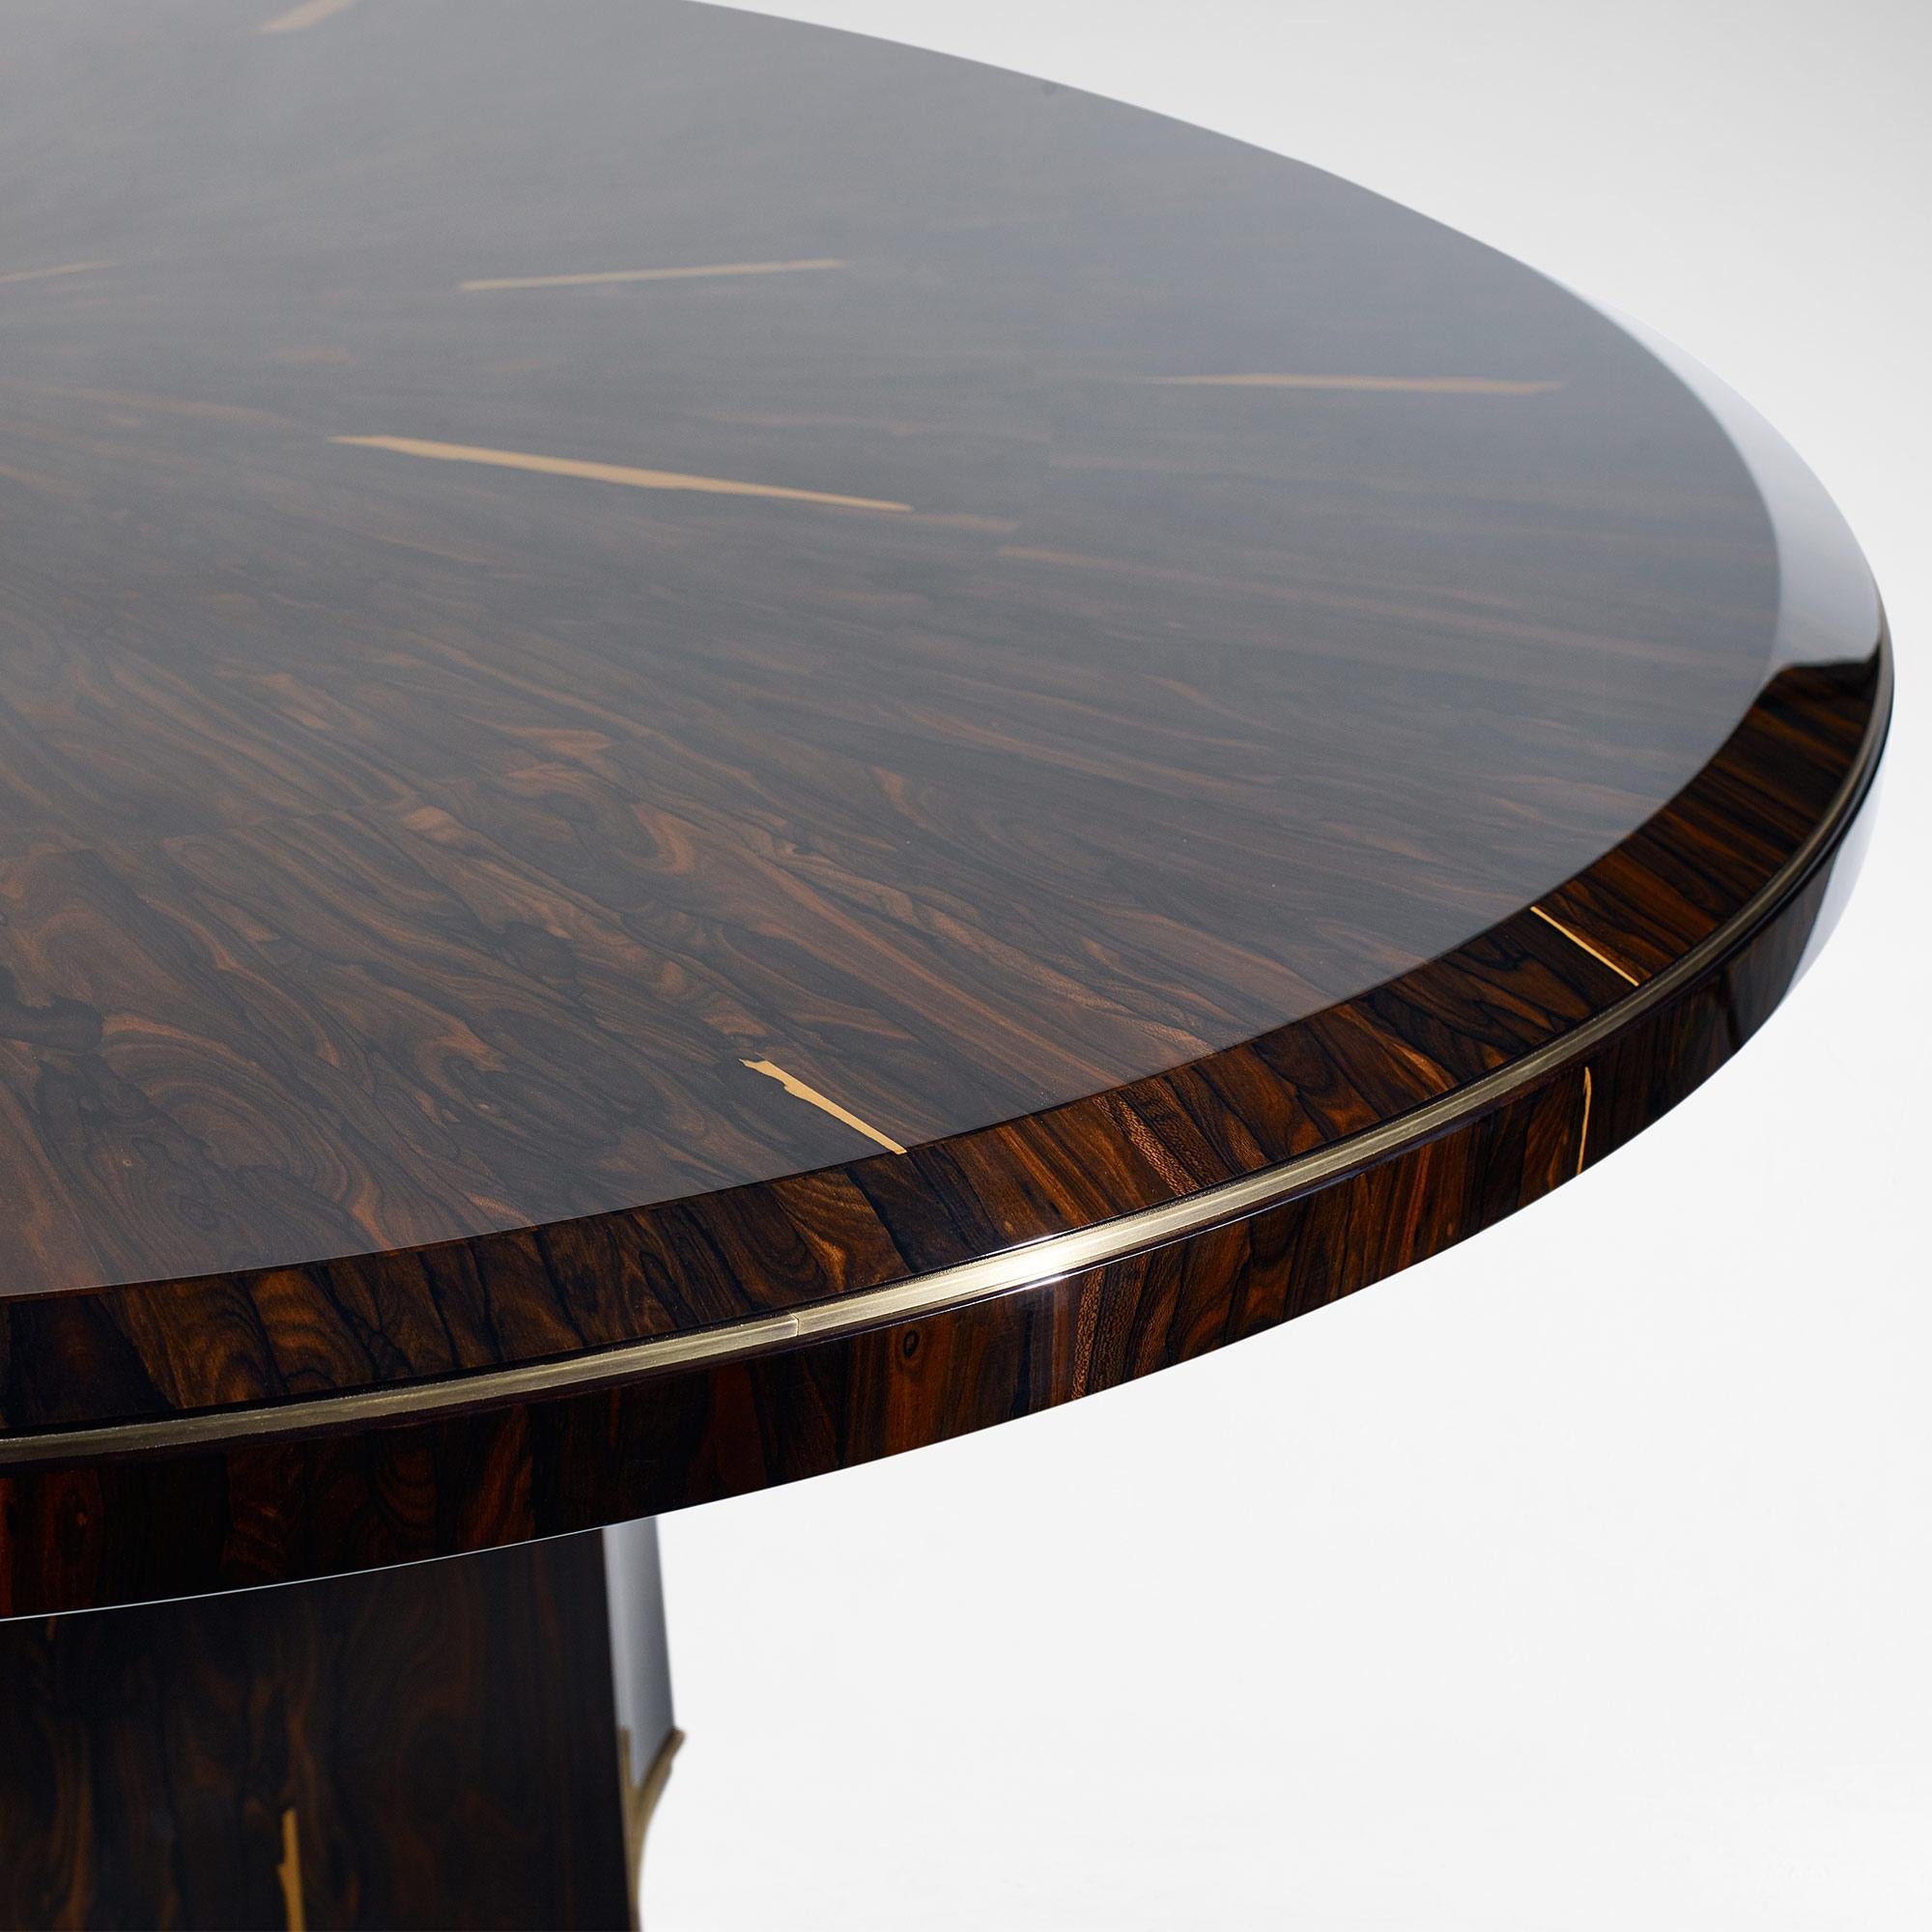 The Ziricote dining table draws inspiration from the swirling gas clouds on Jupiter.